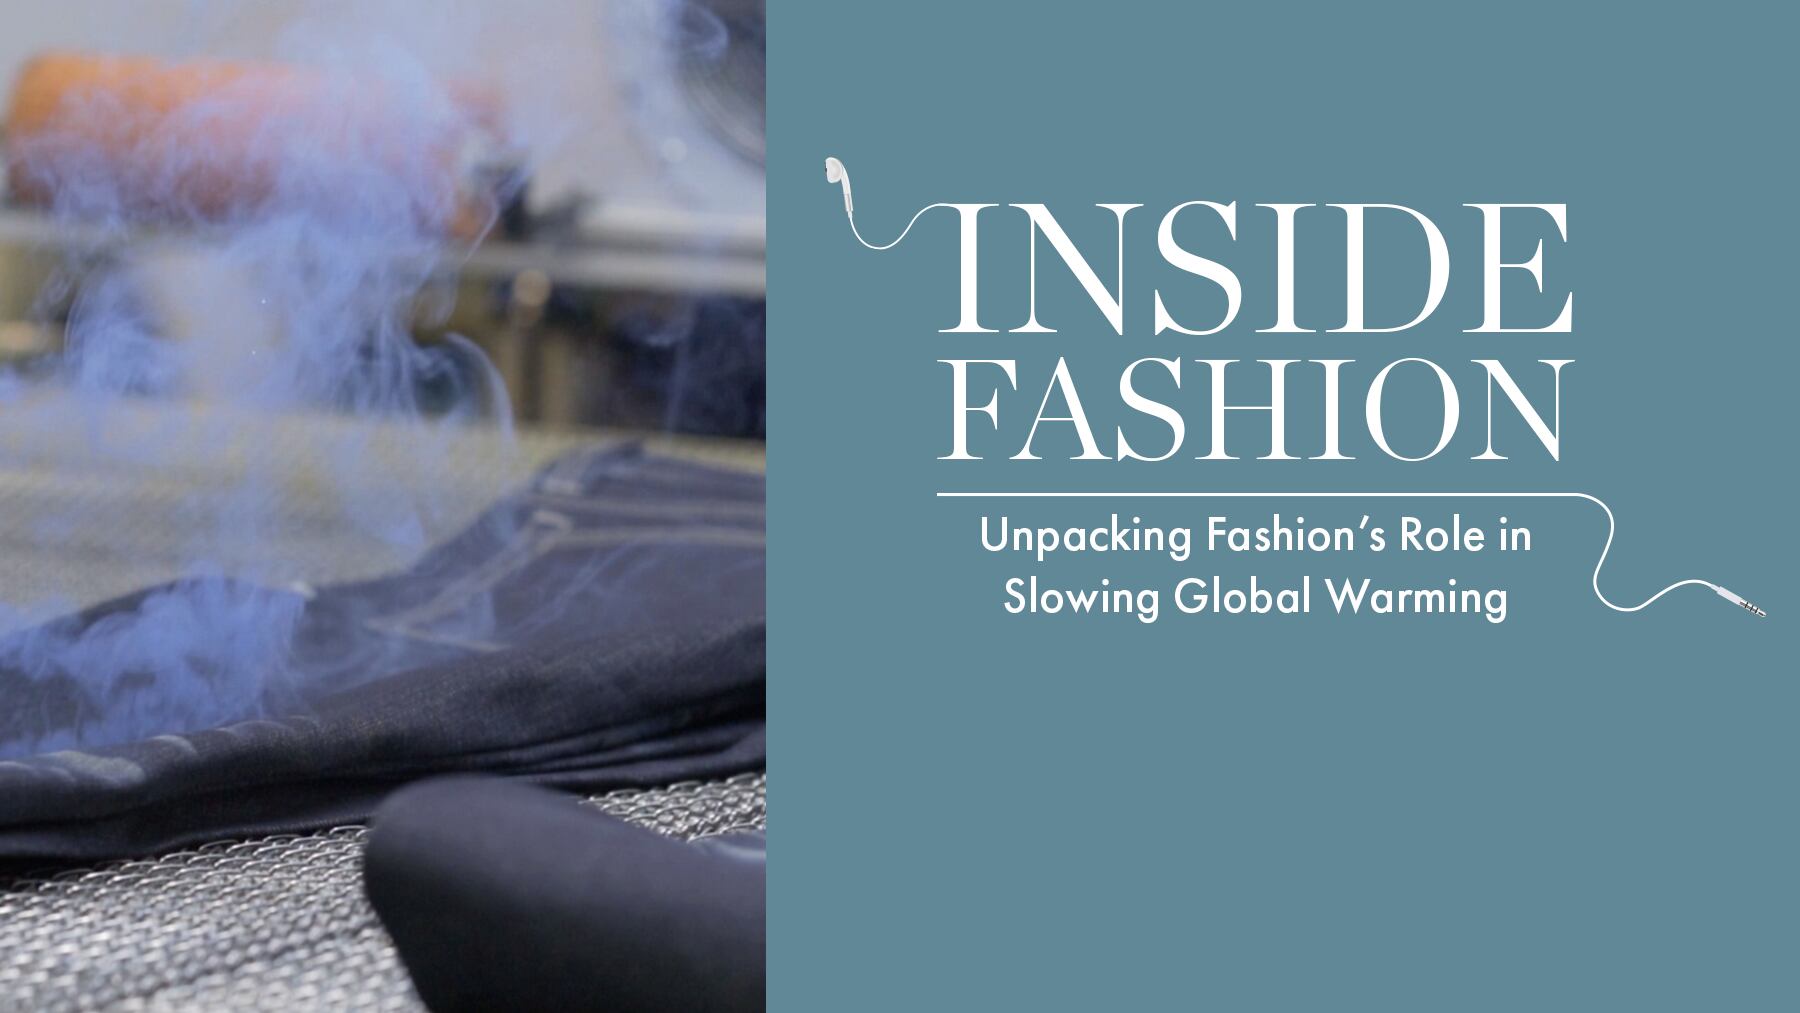 Unpacking Fashion's Role in Slowing Global Warming